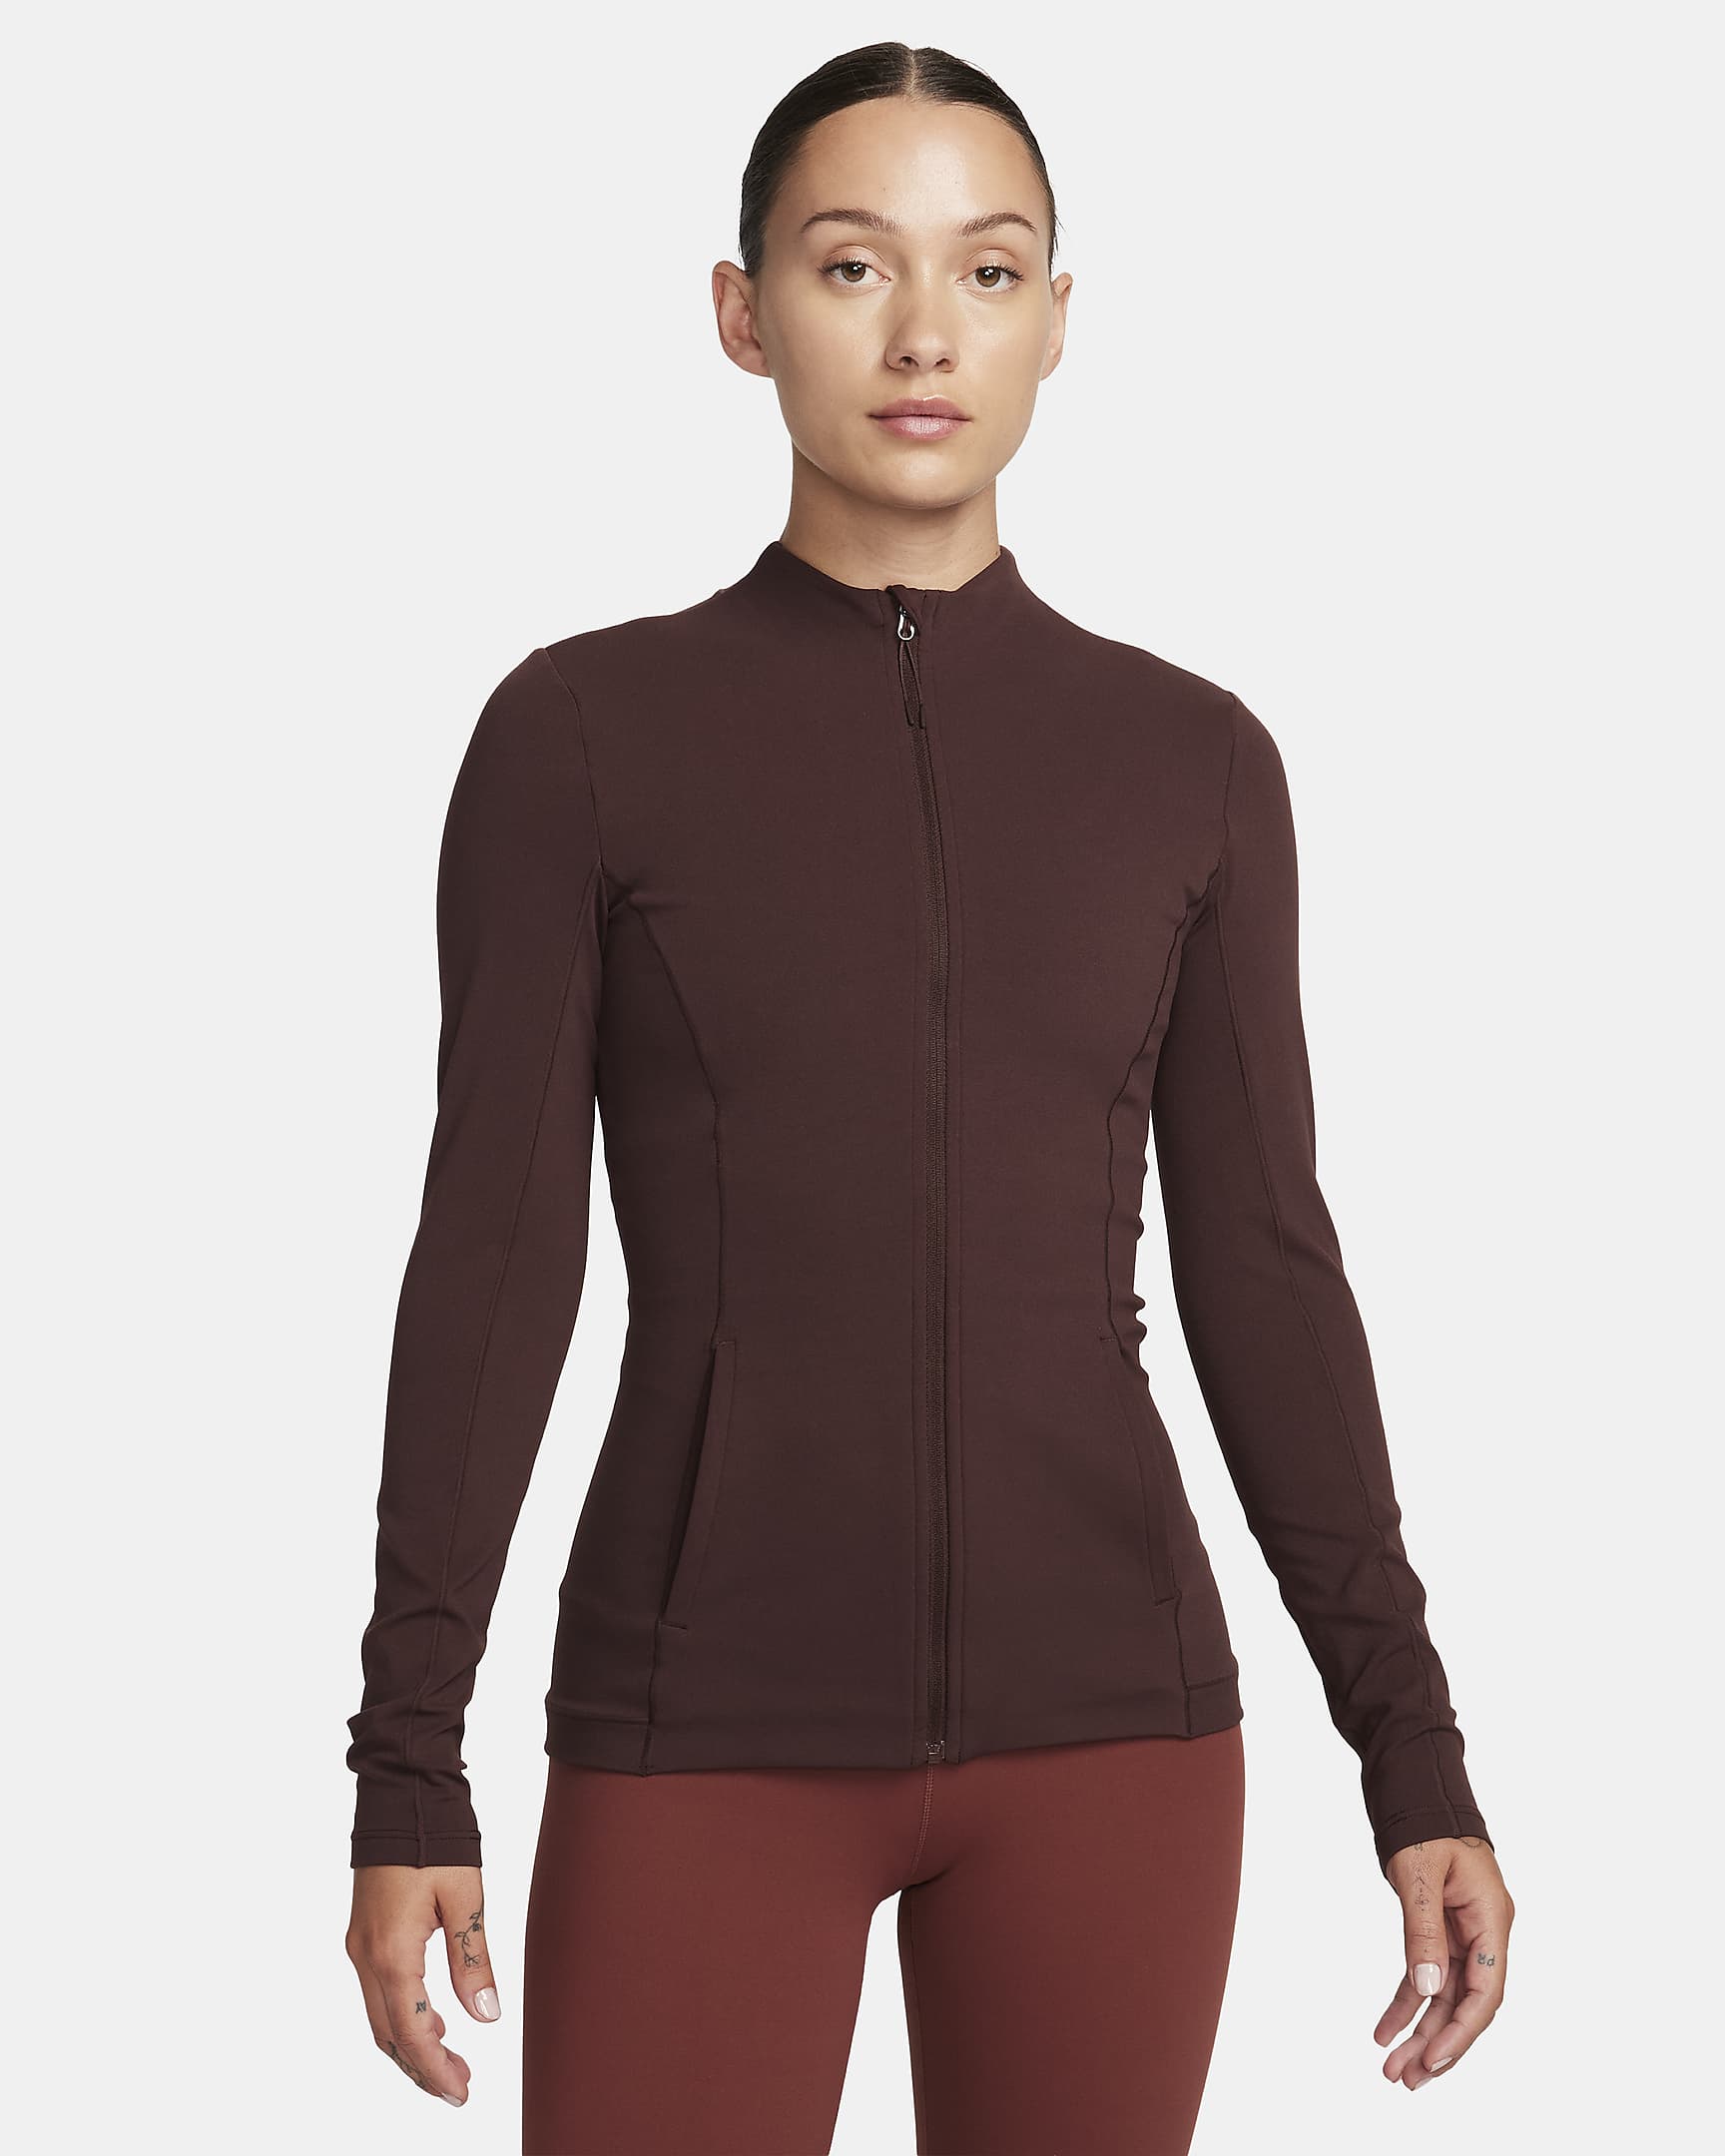 Nike Yoga Dri-FIT Luxe Women's Fitted Jacket. Nike.com